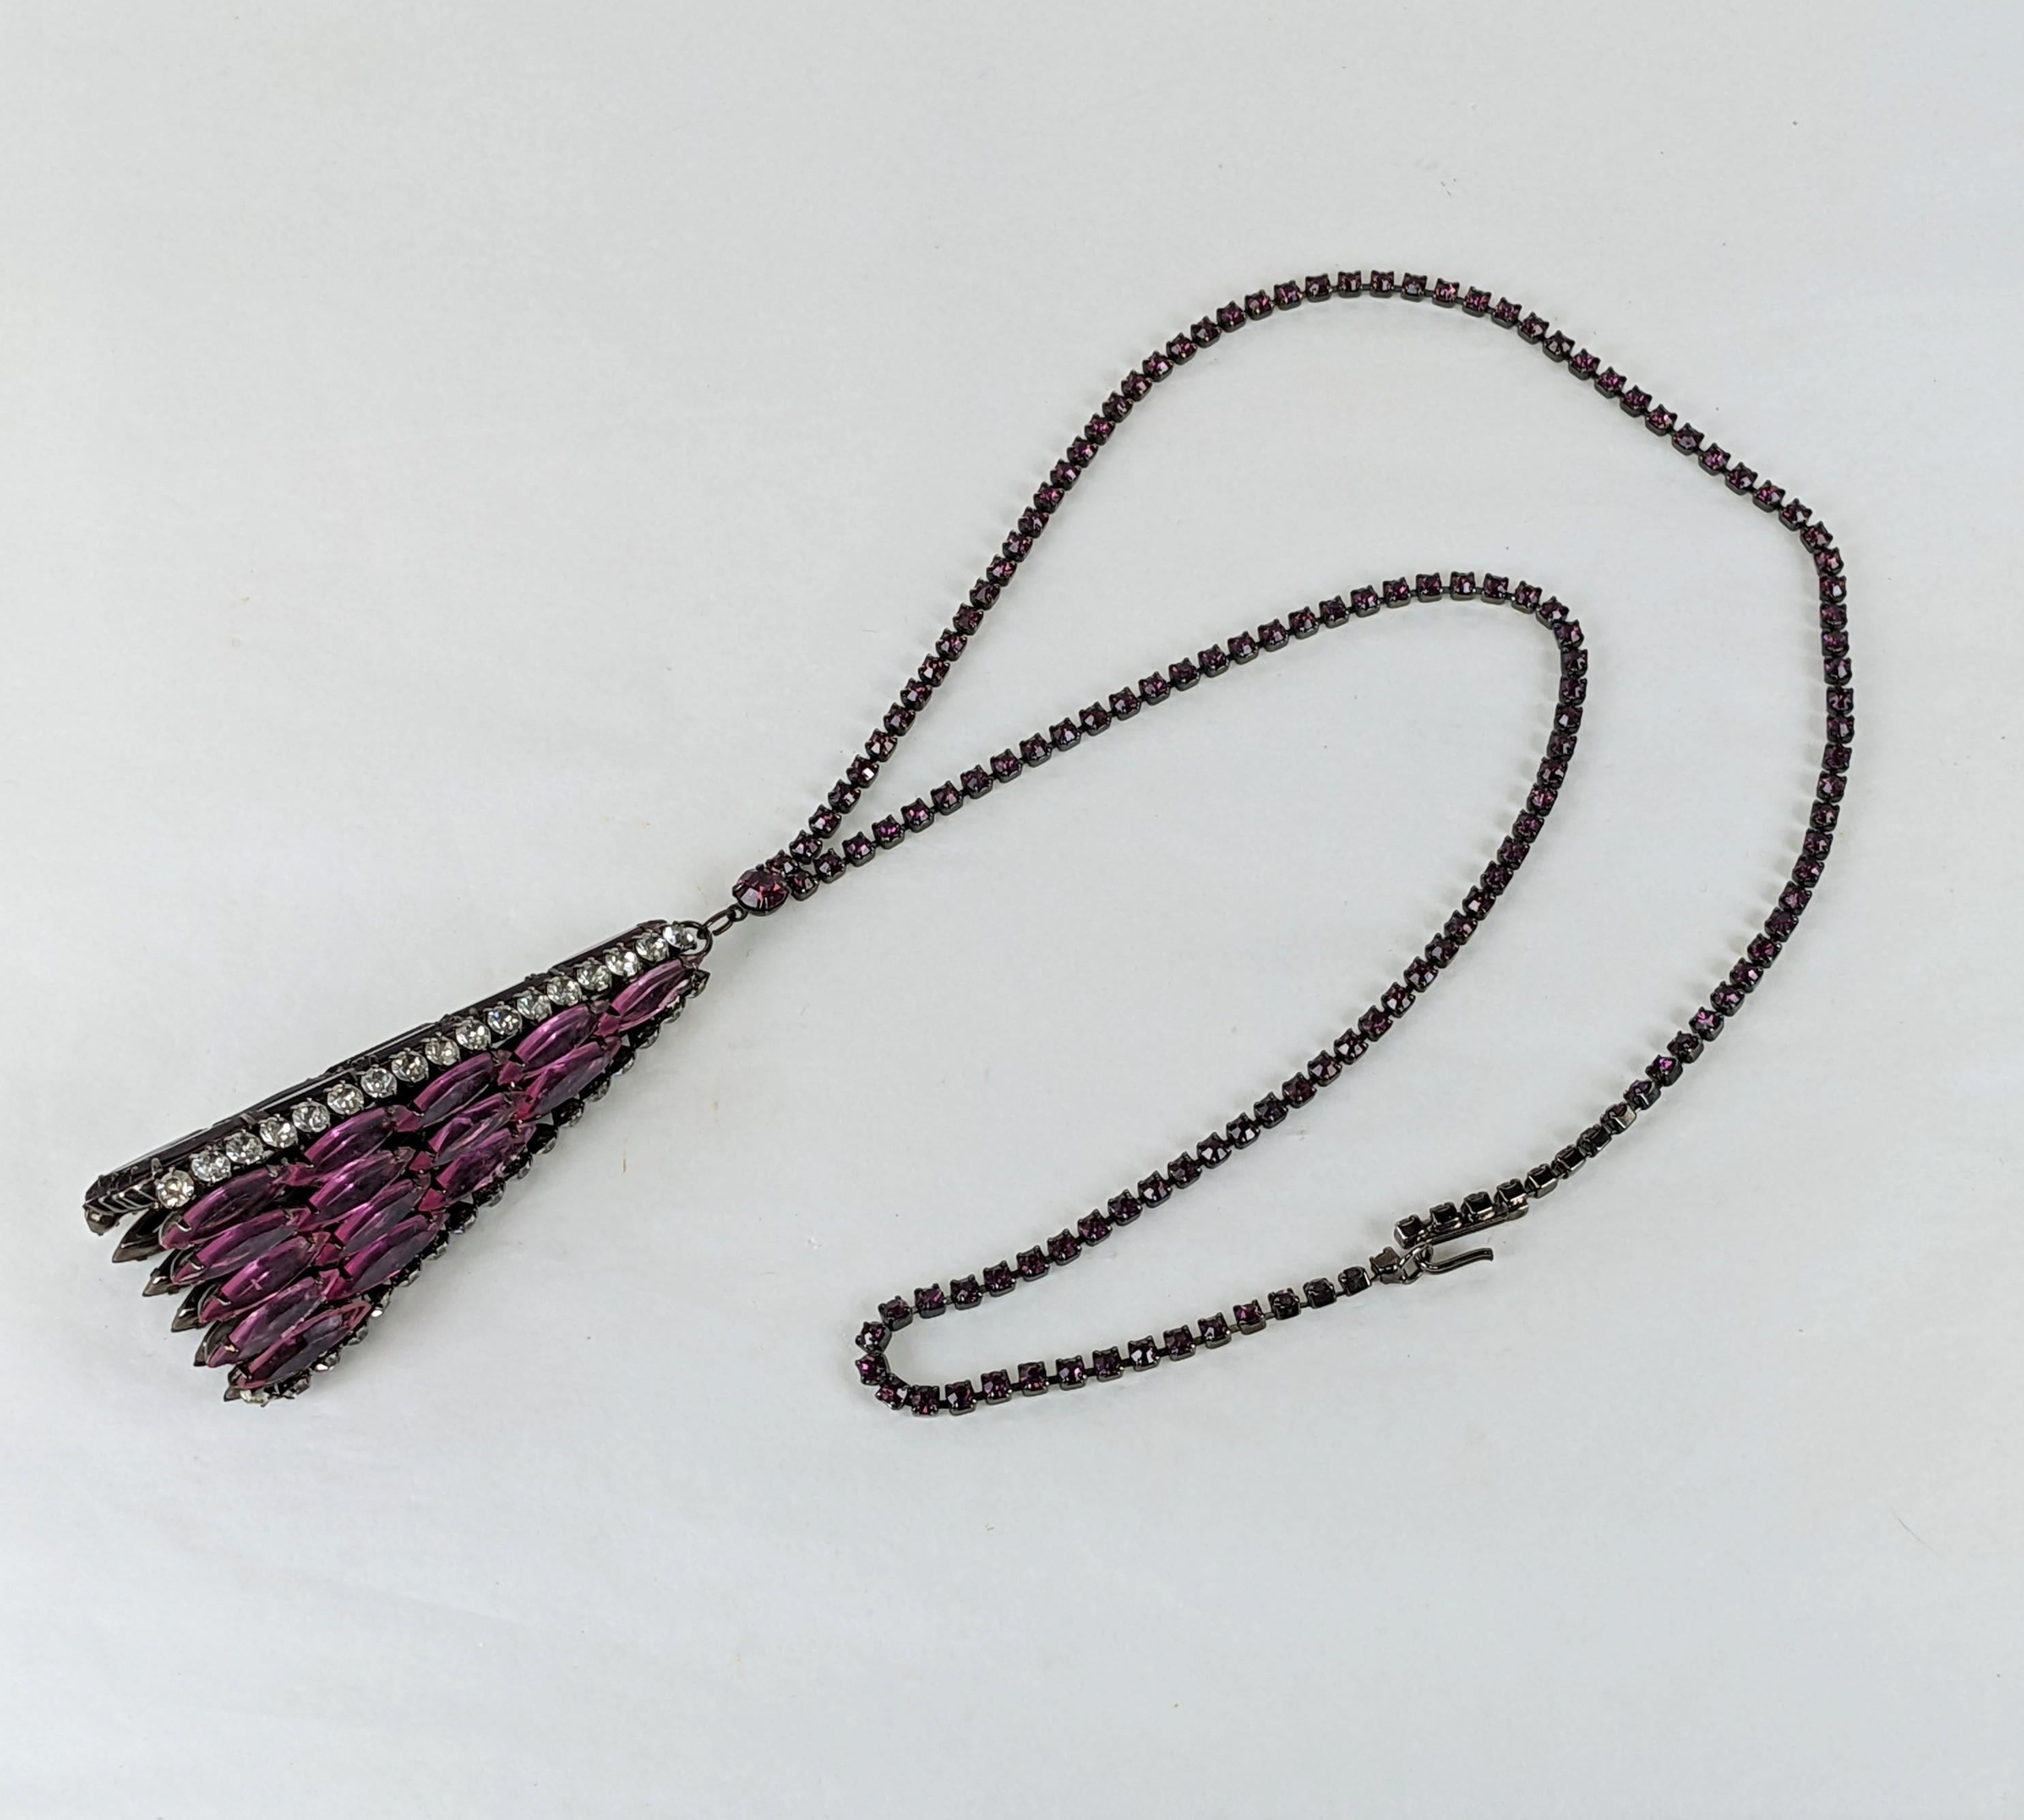 Rare Schreiner long tapered three sided triangular pendant necklace in blackened metal. Each triangle panel is composed of prong set signature long faceted  pointy marquise stones in black jet, amythest and vivid pink. The side spines of crystal